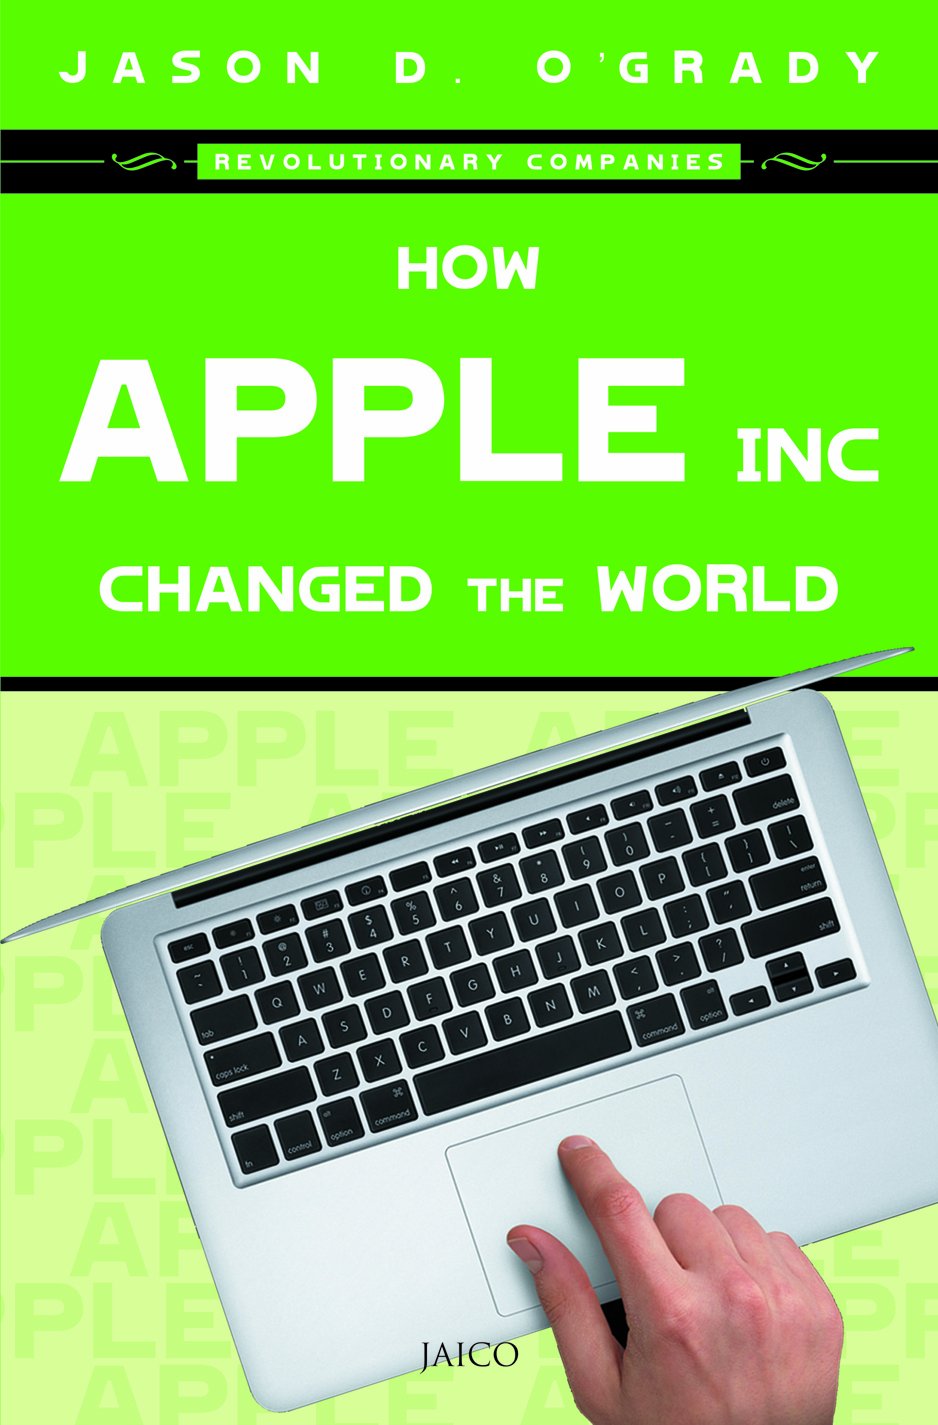 How Apple Inc. Changed The World